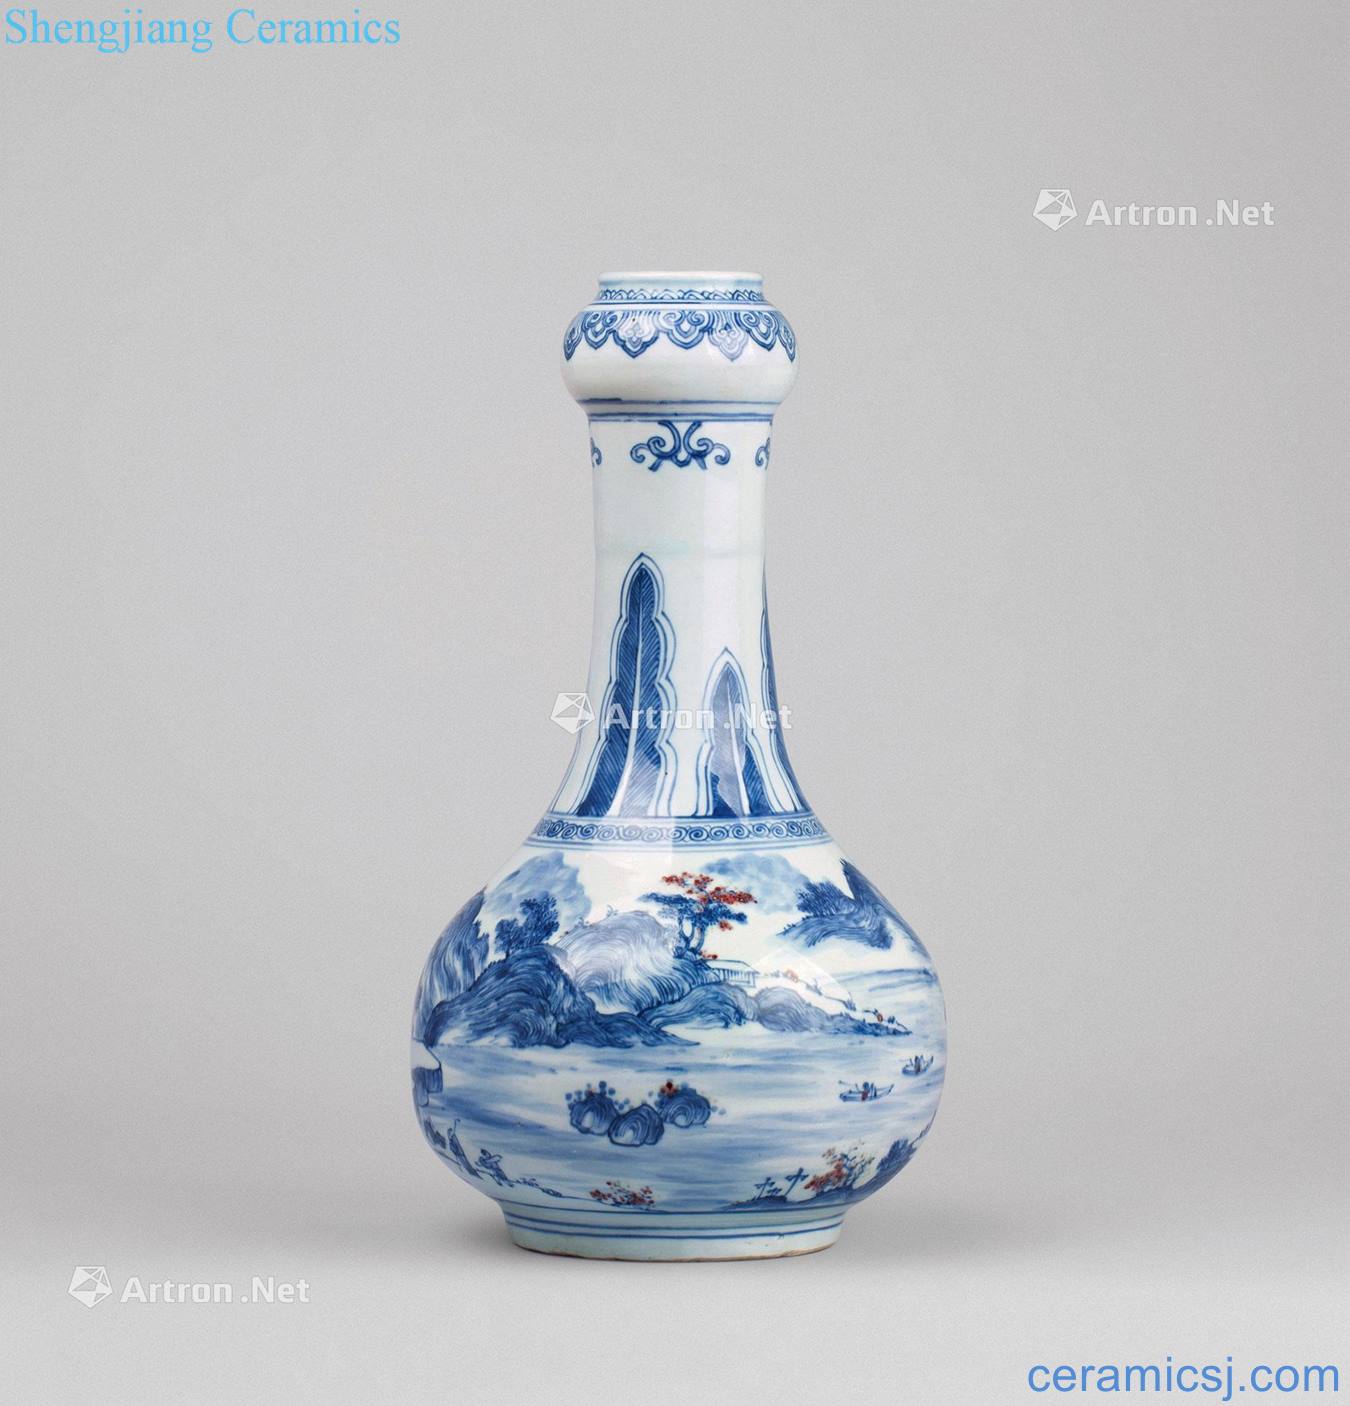 In the qing dynasty Blue and white youligong landscape pattern garlic bottles